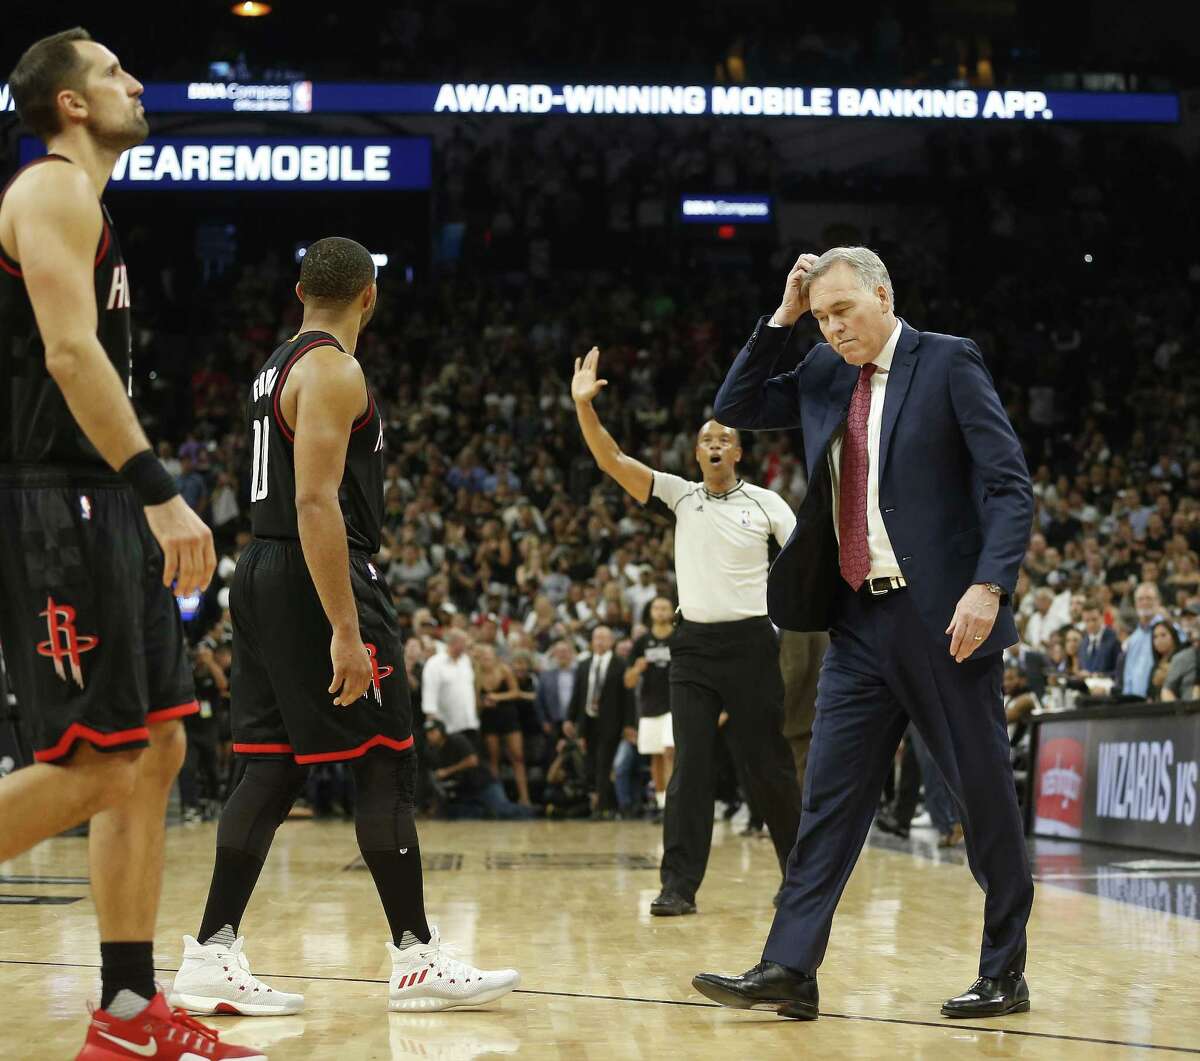 Rockets coach Mike D’Antoni reacts as he walks out for a timeout in the final seconds during overtime of Game 5 against the Spurs at the AT&T Center on May 9, 2017, in San Antonio.